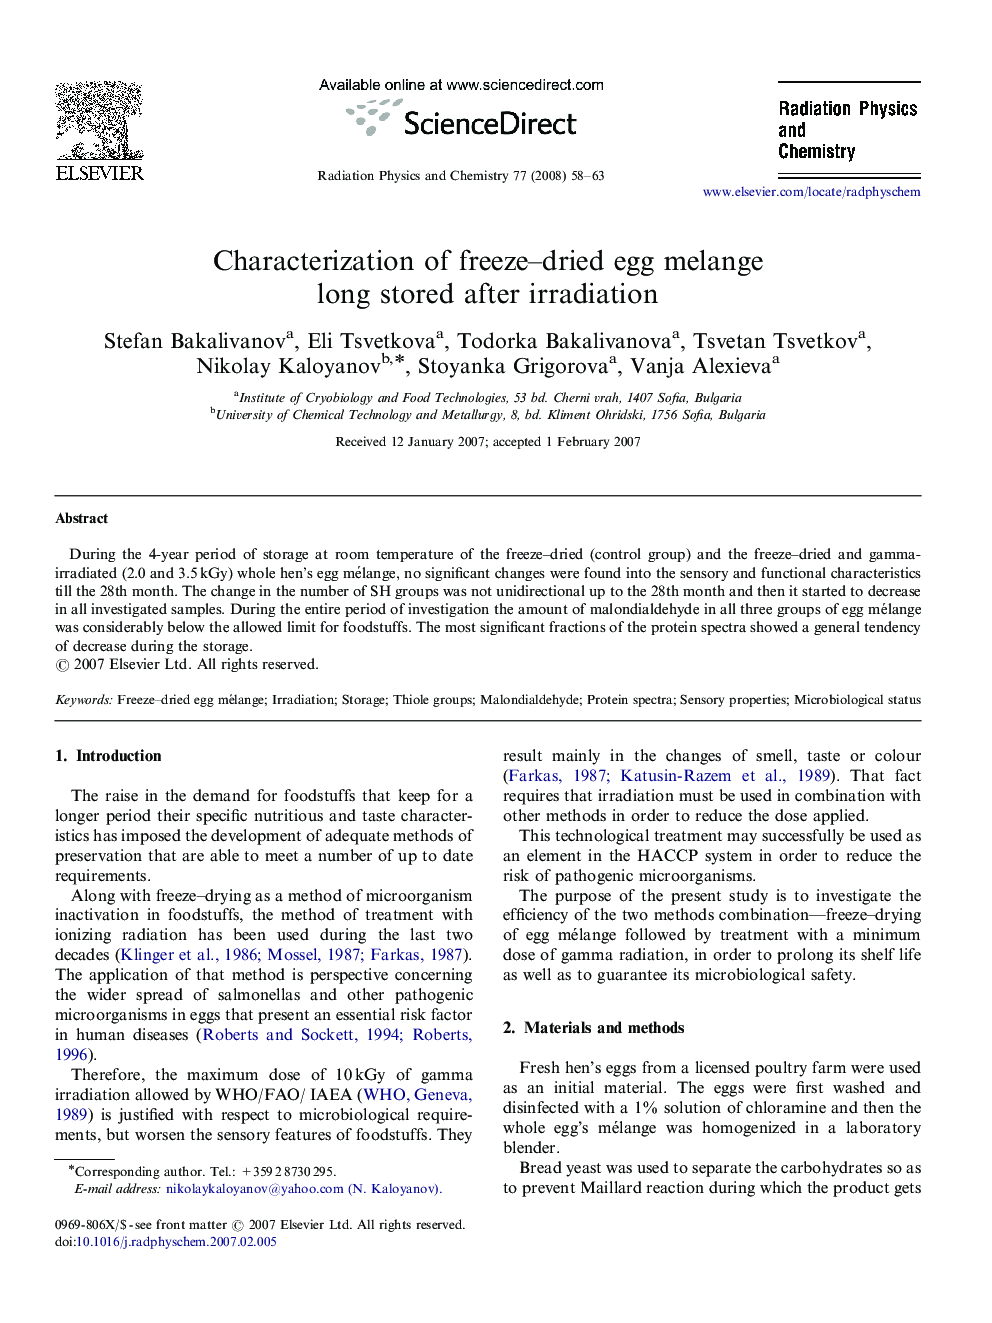 Characterization of freeze-dried egg melange long stored after irradiation